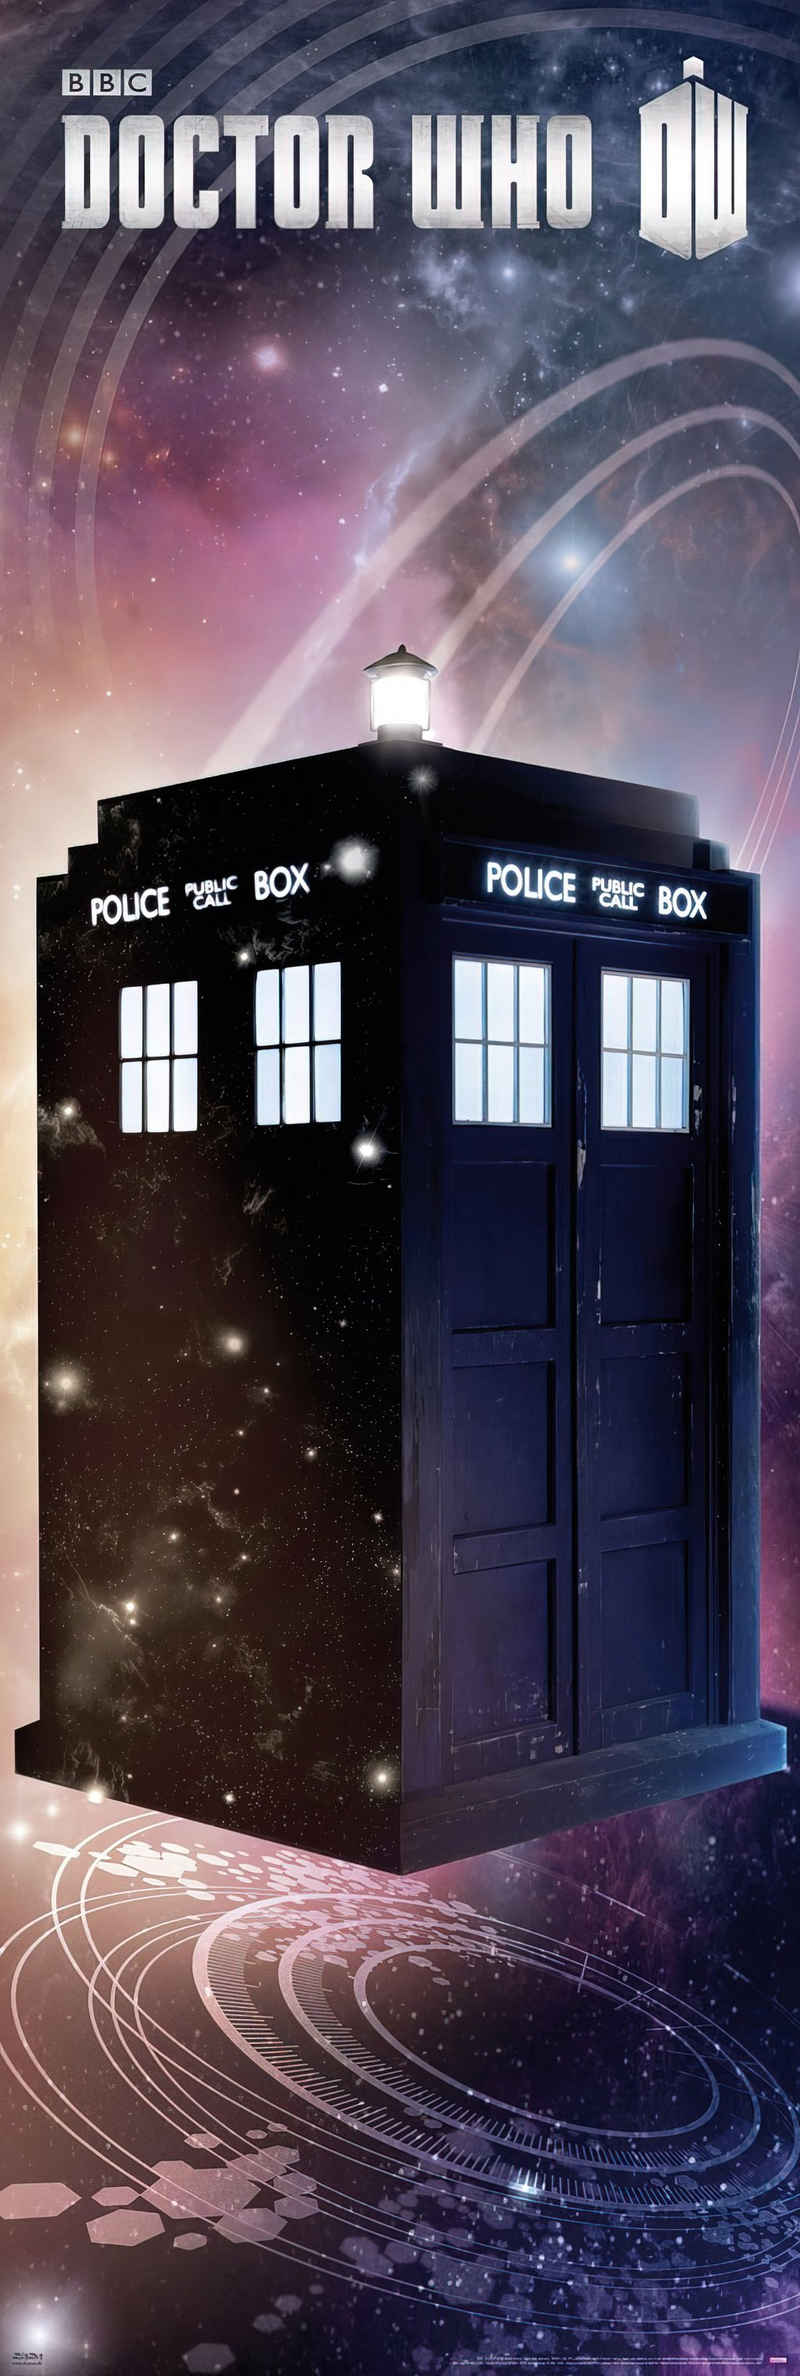 Doctor Who Poster »Doctor Who Poster Tardis 53 x 158 cm«